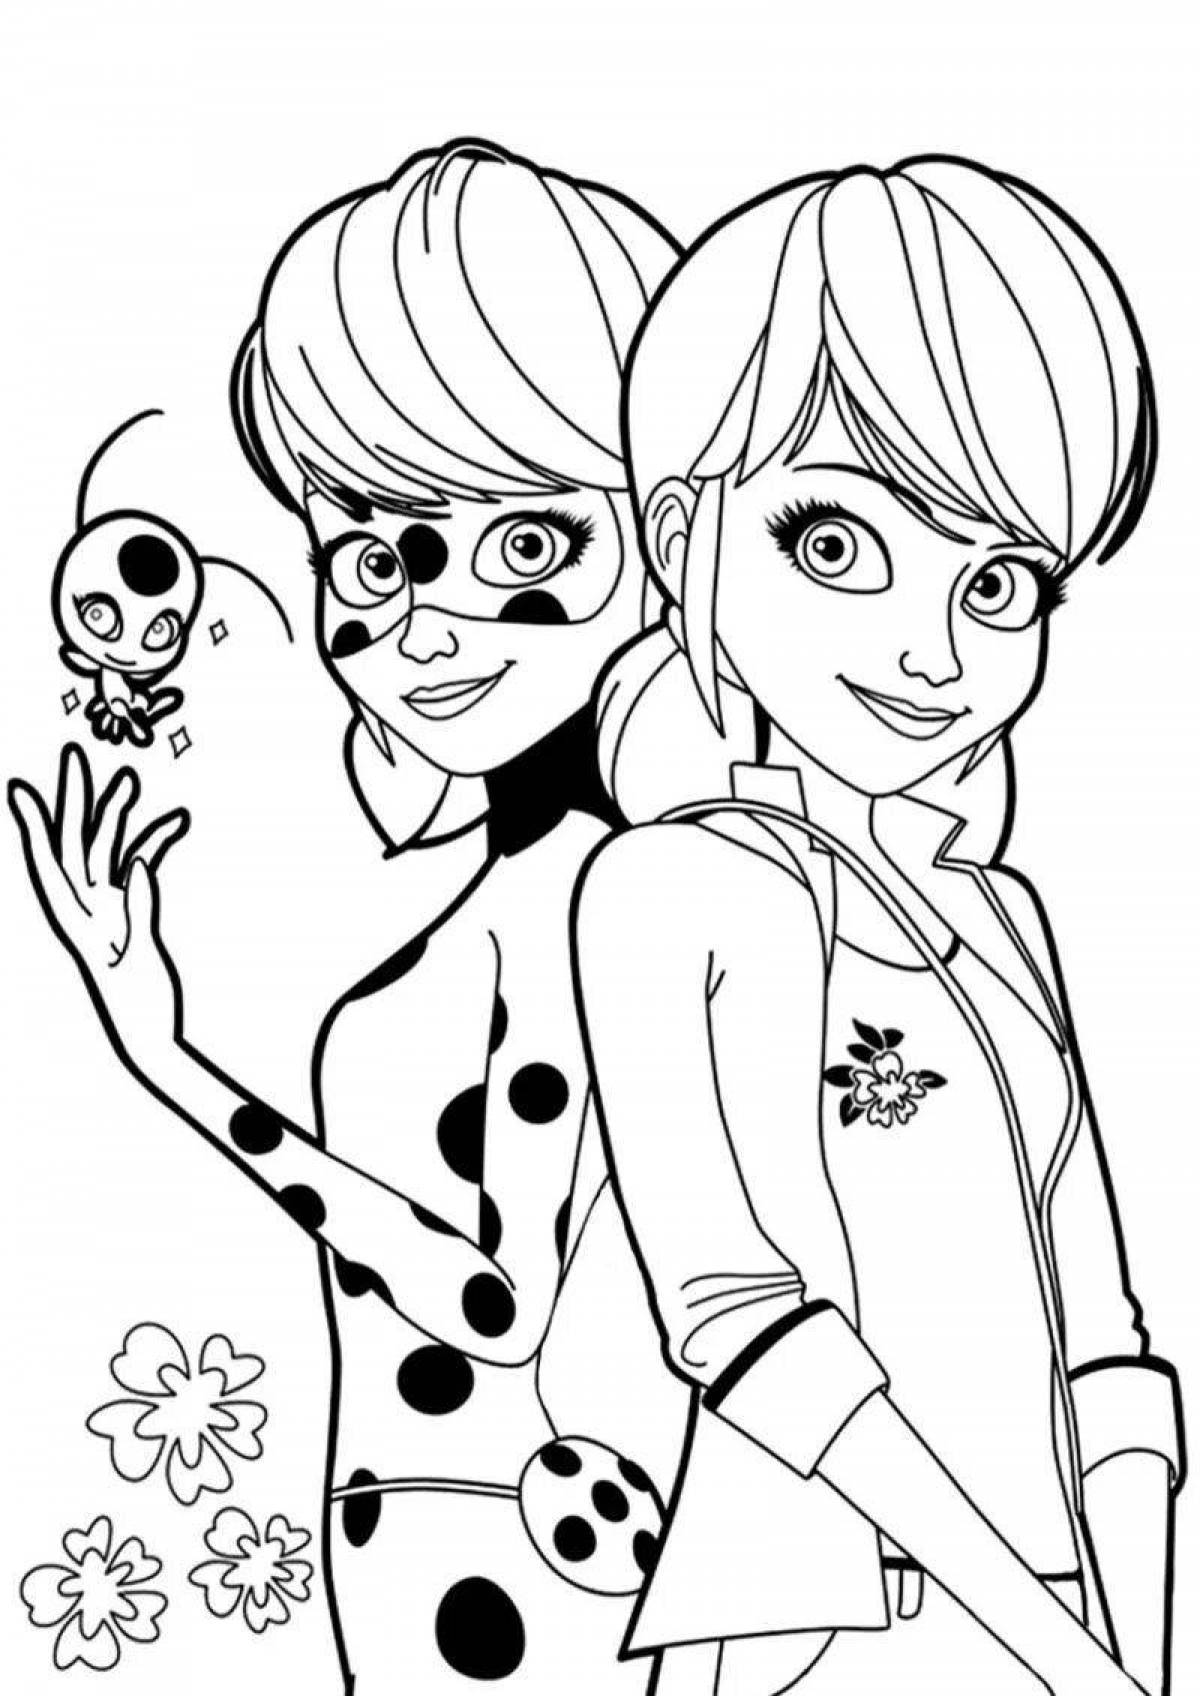 Coloring page exquisite ladybug and super cat